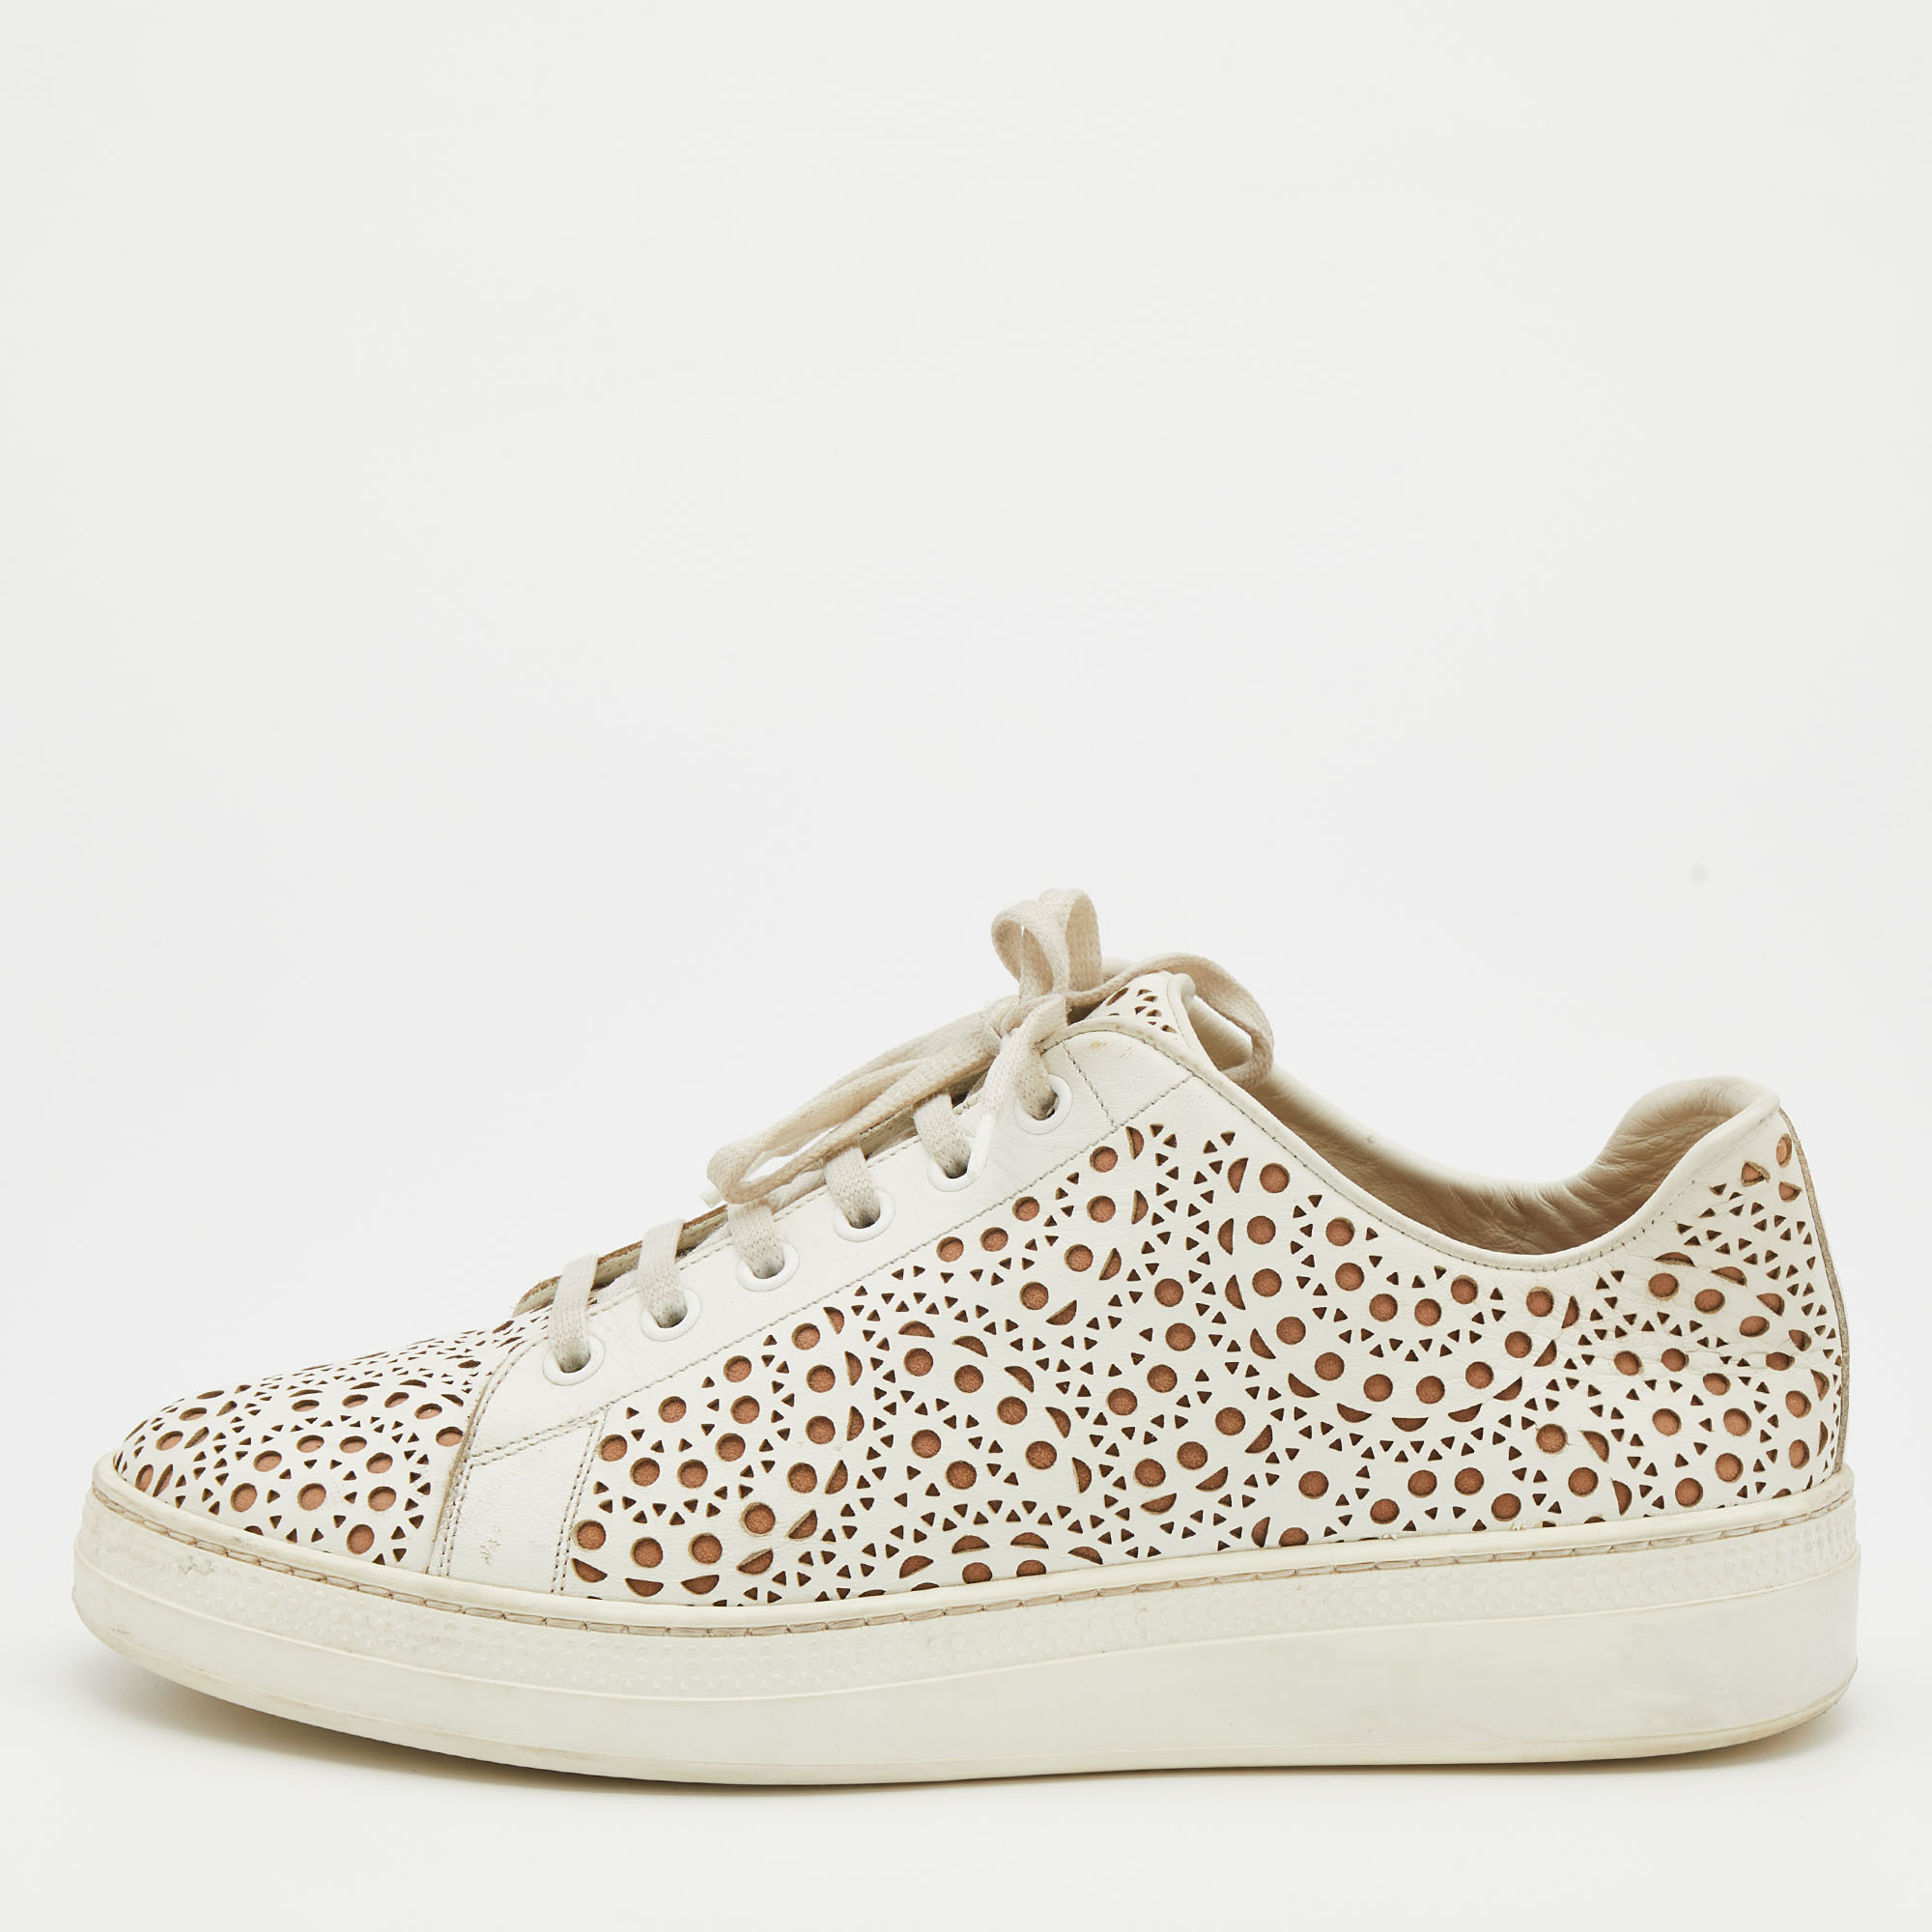 Pre-owned Alaïa White Laser Cut Leather Low Top Sneakers Size 38